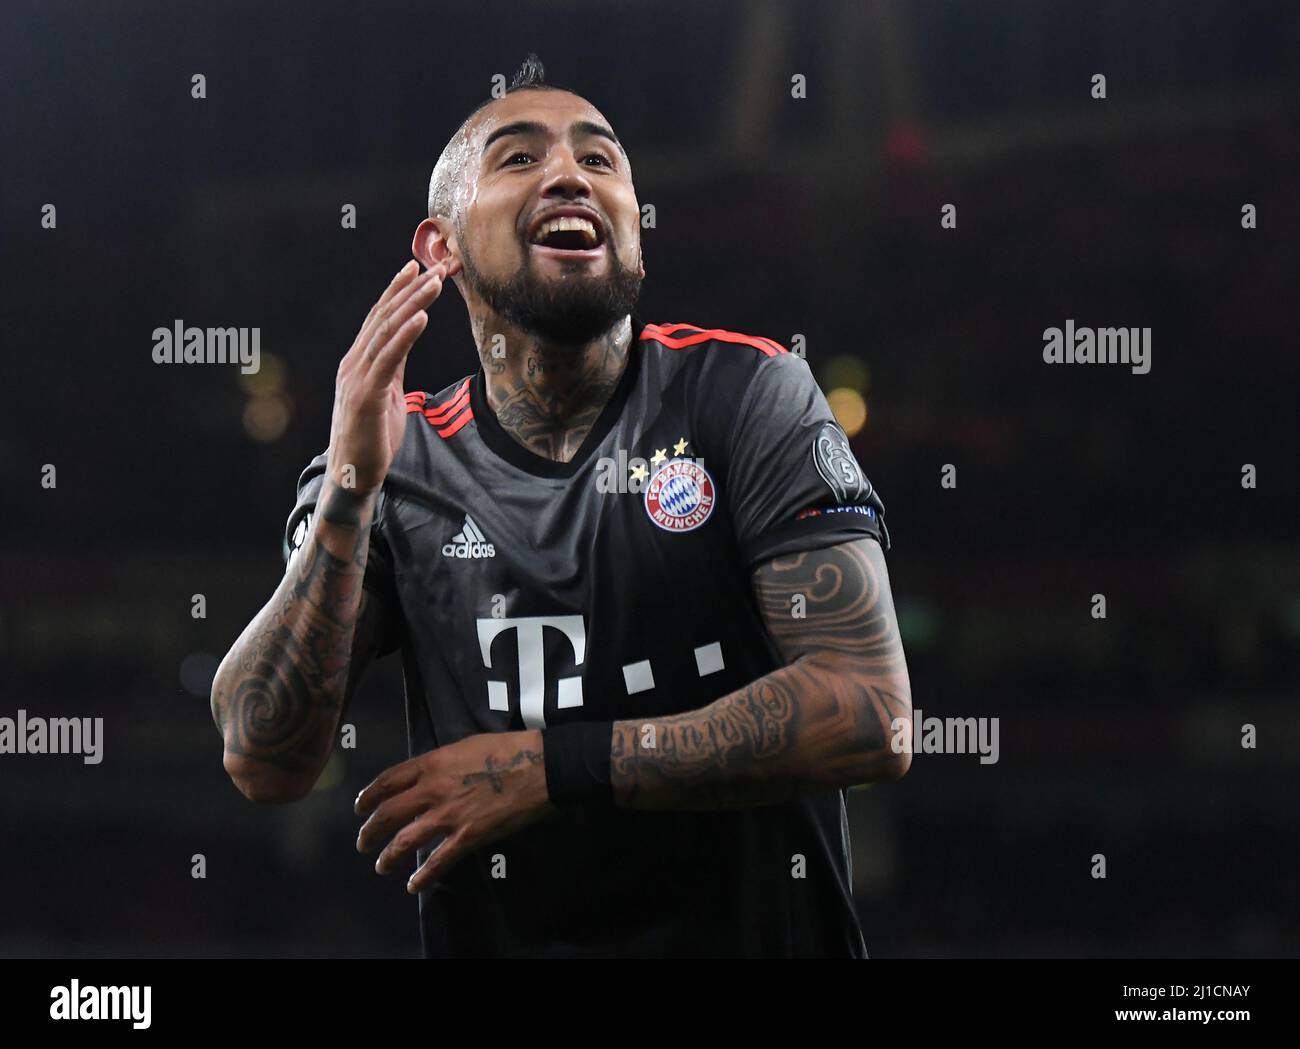 LONDON, ENGLAND - MARCH 7, 2017: Arturo Vidal of Bayern celebrates after he scored a goal during the second leg of the UEFA Champions League Round of 16 game between Arsenal FC and Bayern Munchen at Emirates Stadium. Copyright: Cosmin Iftode/Picstaff Stock Photo